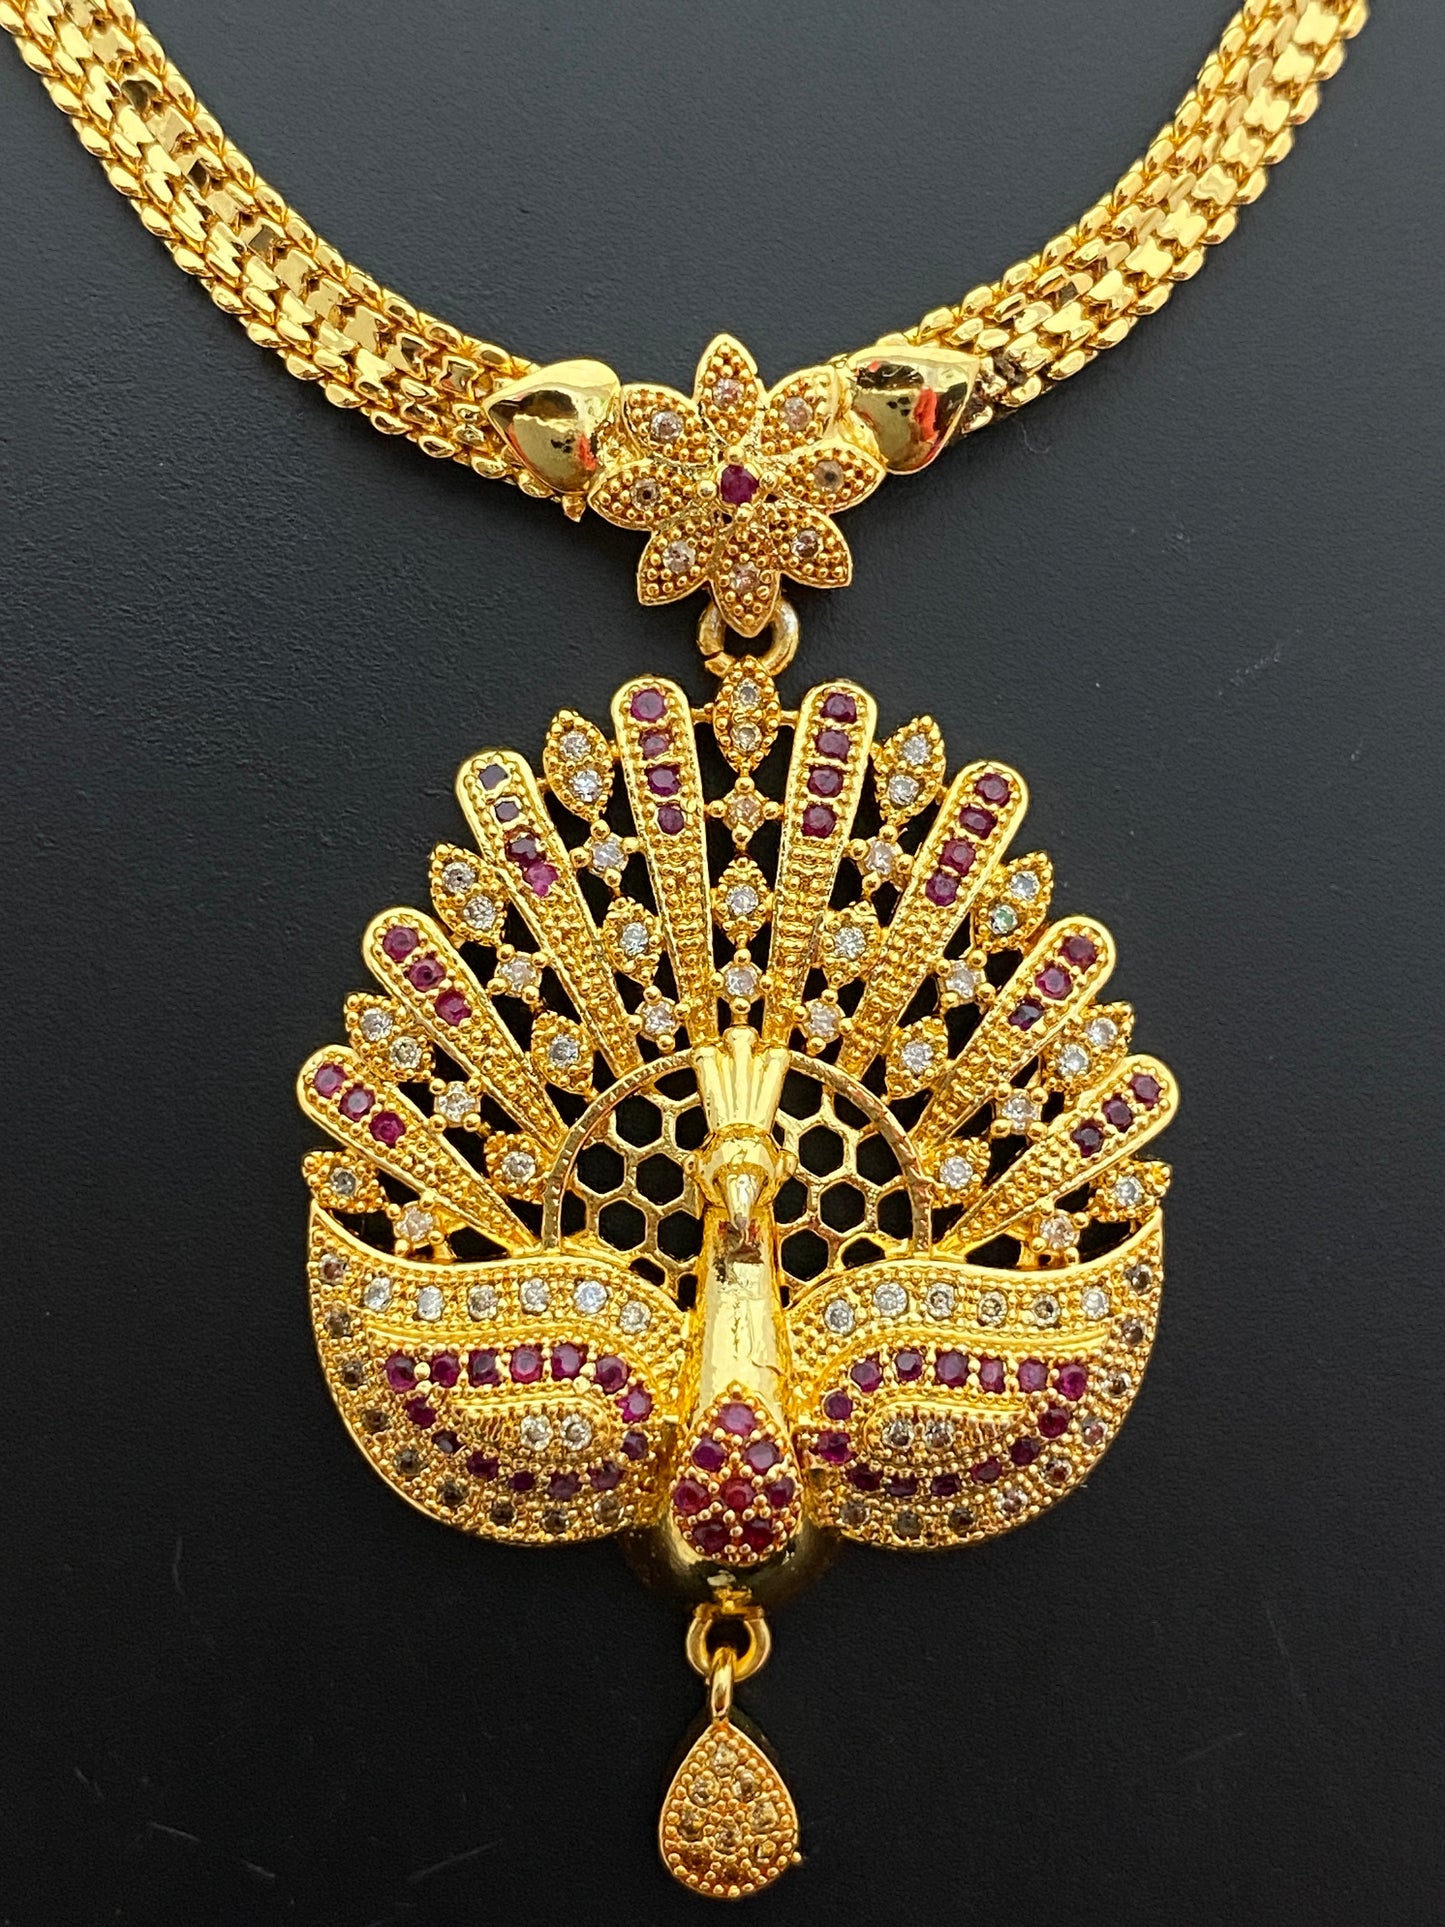 Attractive Peacock Pendant With Drops In USA